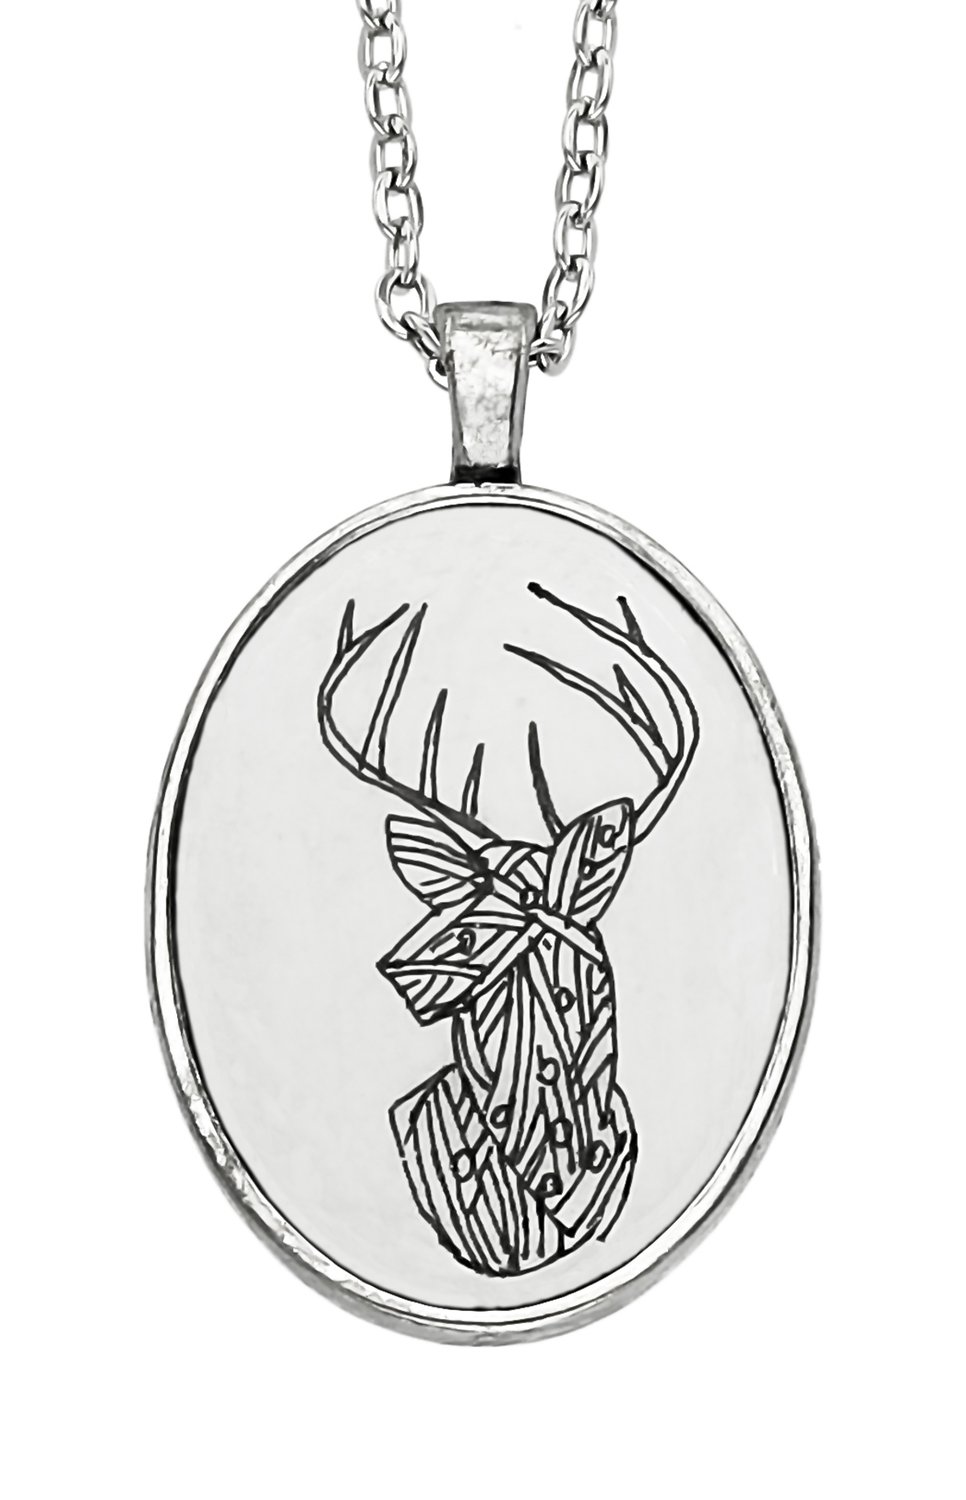 Stag Abstract Silver Plated Oval Shaped Hand drawn Chain Pendant #2